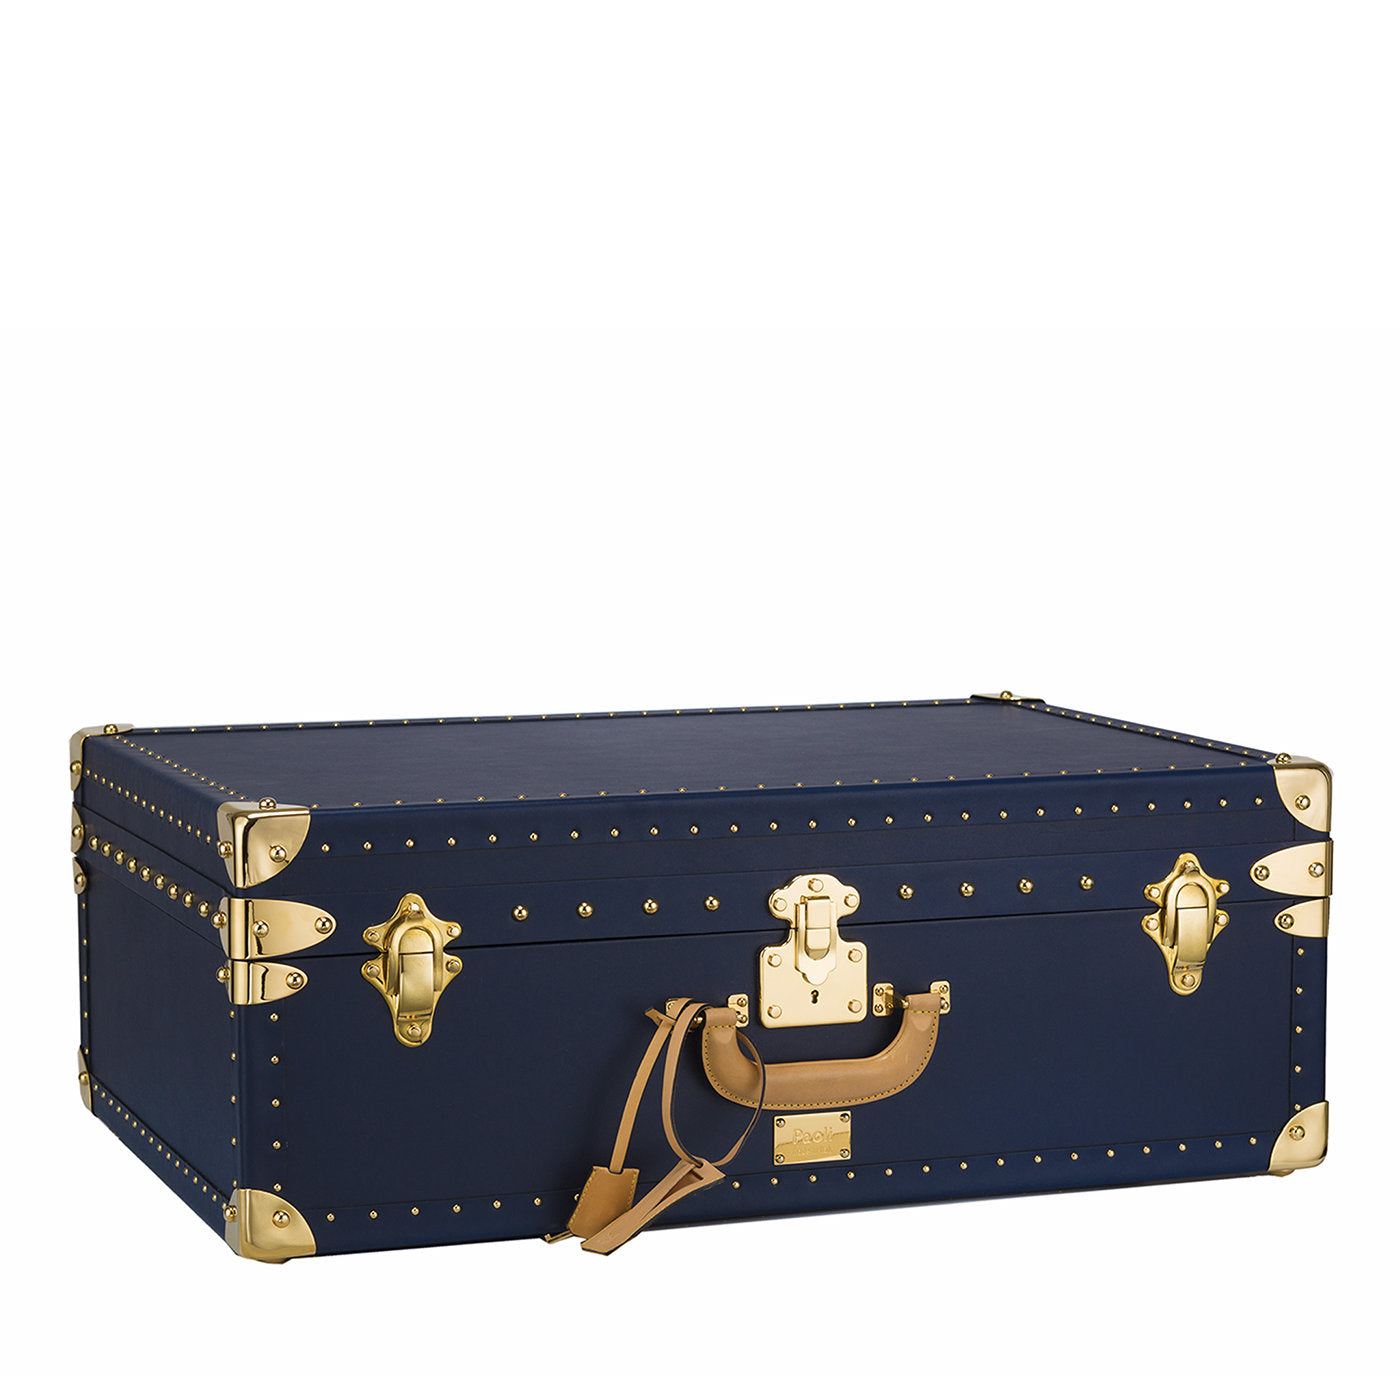 Royal Imperial 70 Suitcase - Alternative view 1